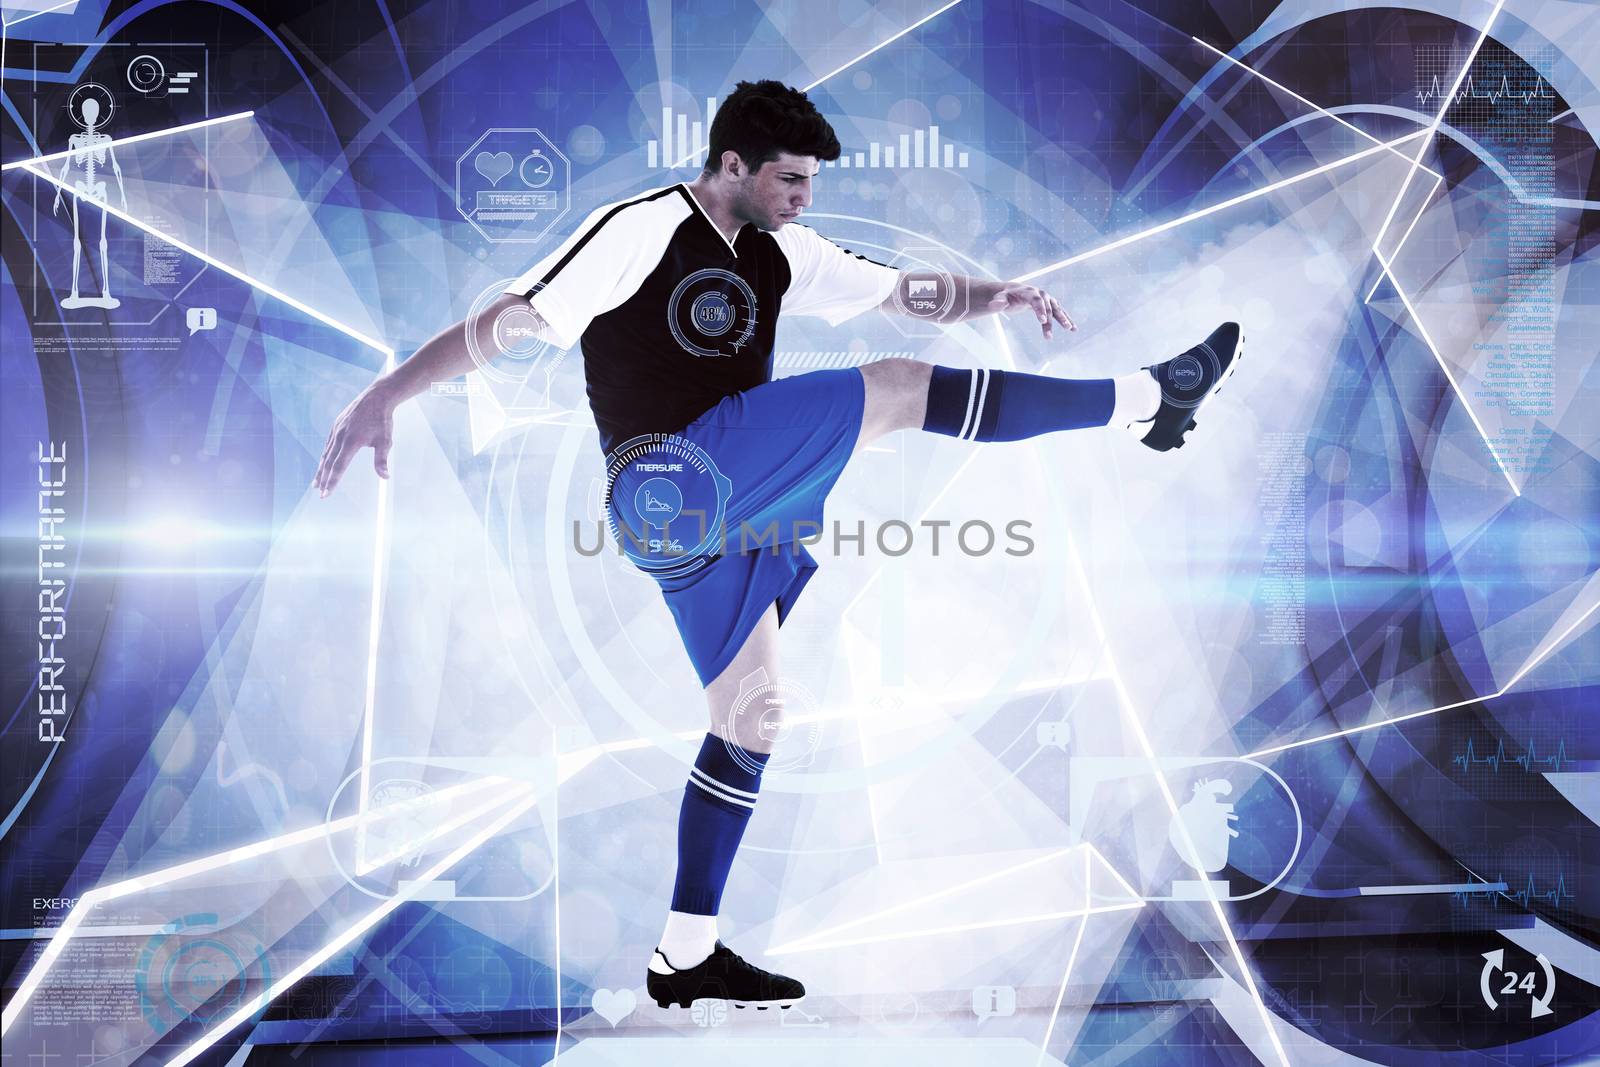 Football player against white abstract angular design